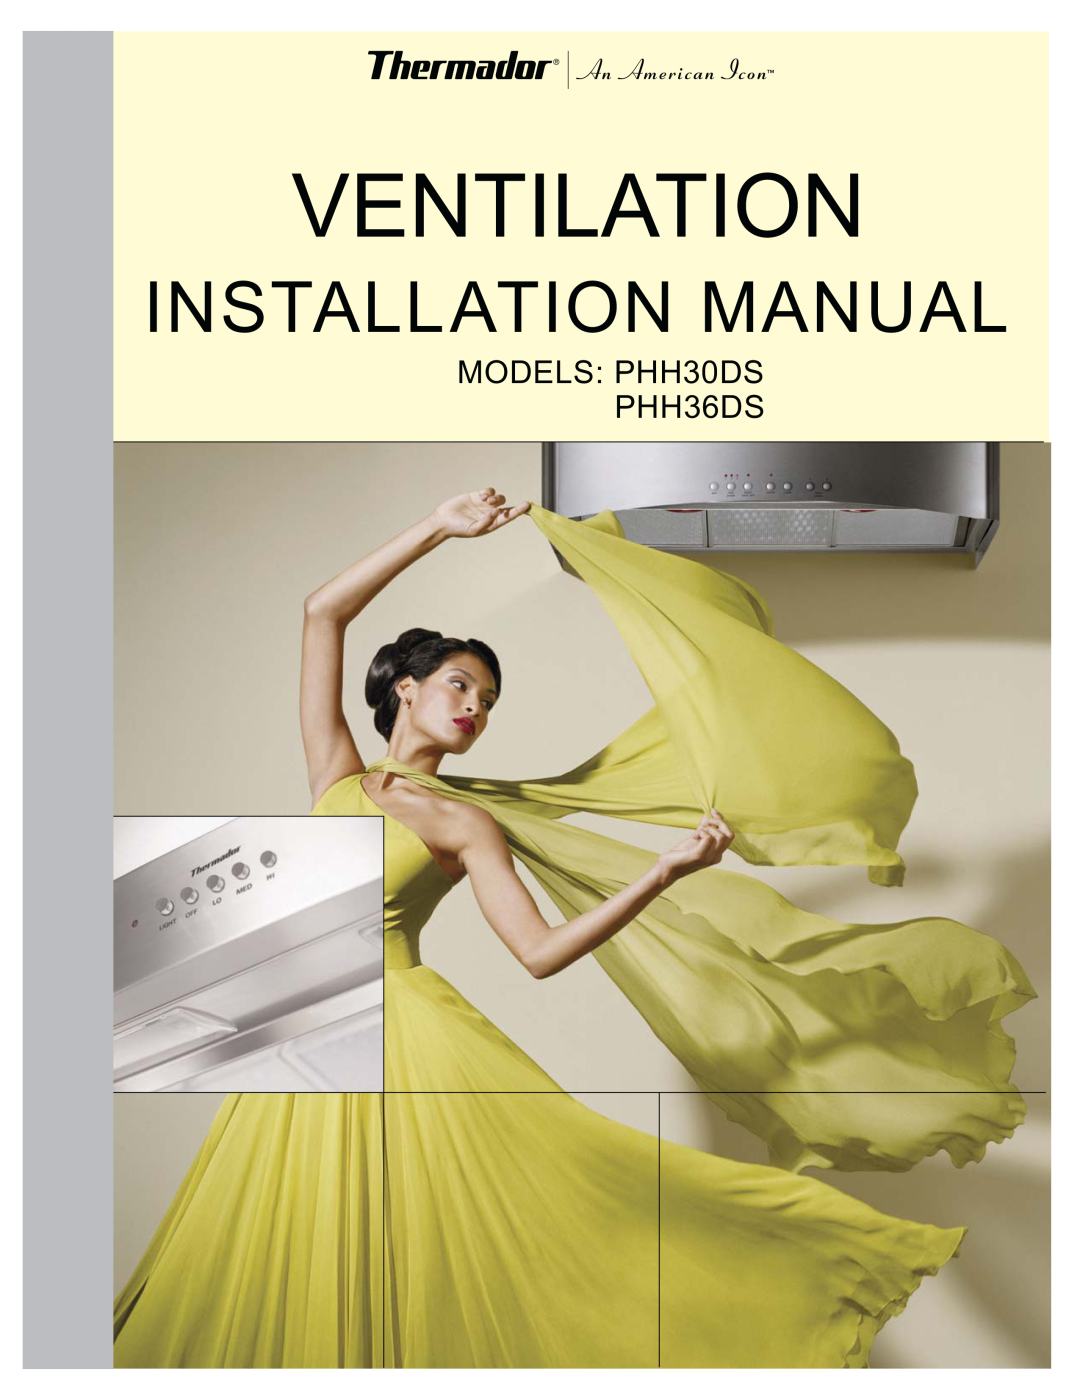 Thermador manual Ventilation, Installation Manual, MODELS PHH30DS PHH36DS 